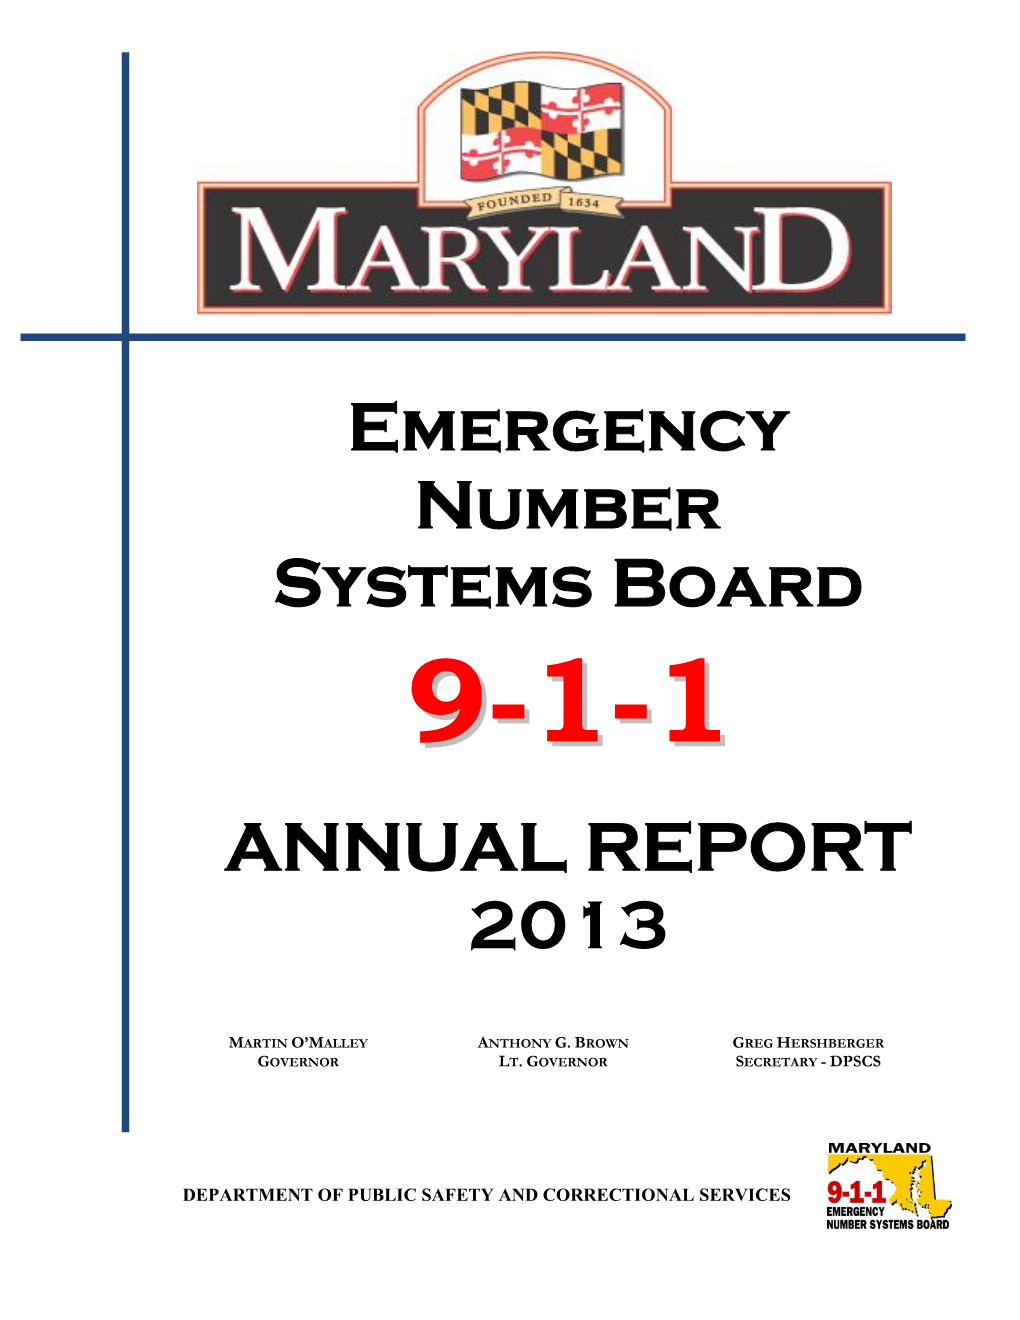 Emergency Number Systems Board ANNUAL REPORT 2013